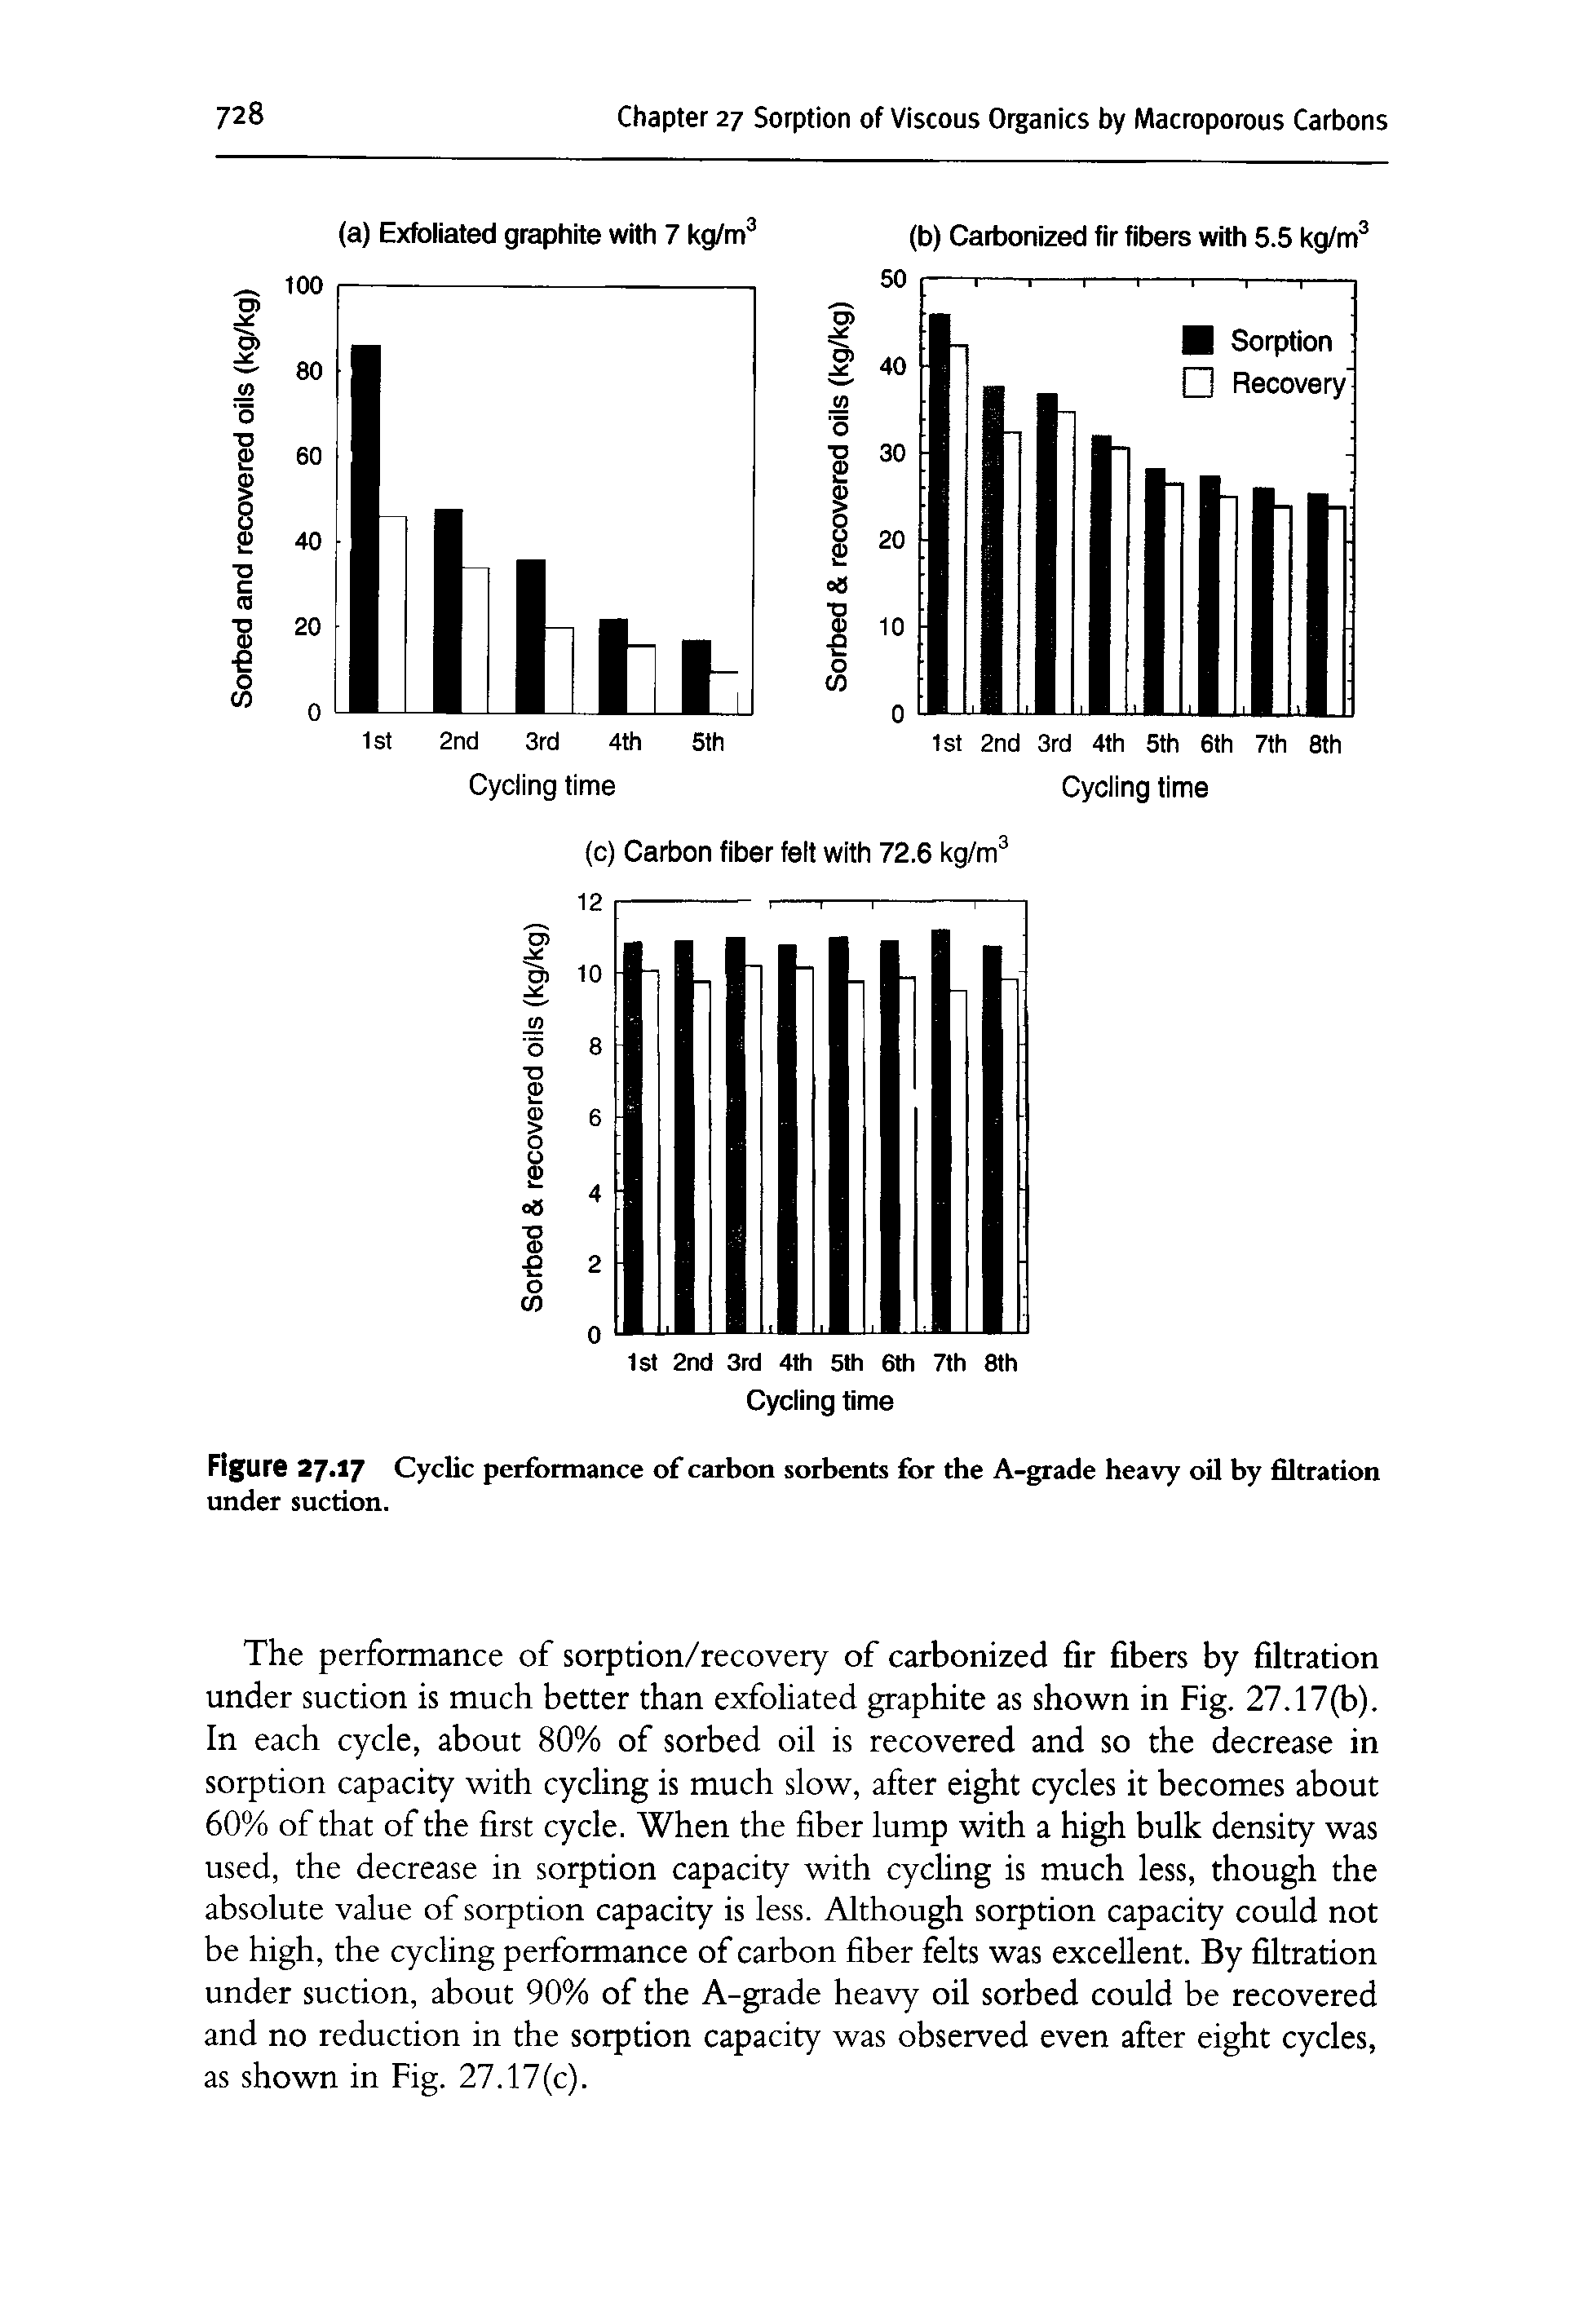 Figure 27.17 Cyclic performance of carbon sorbents for tbe A-grade heavy oil by filtration under suction.